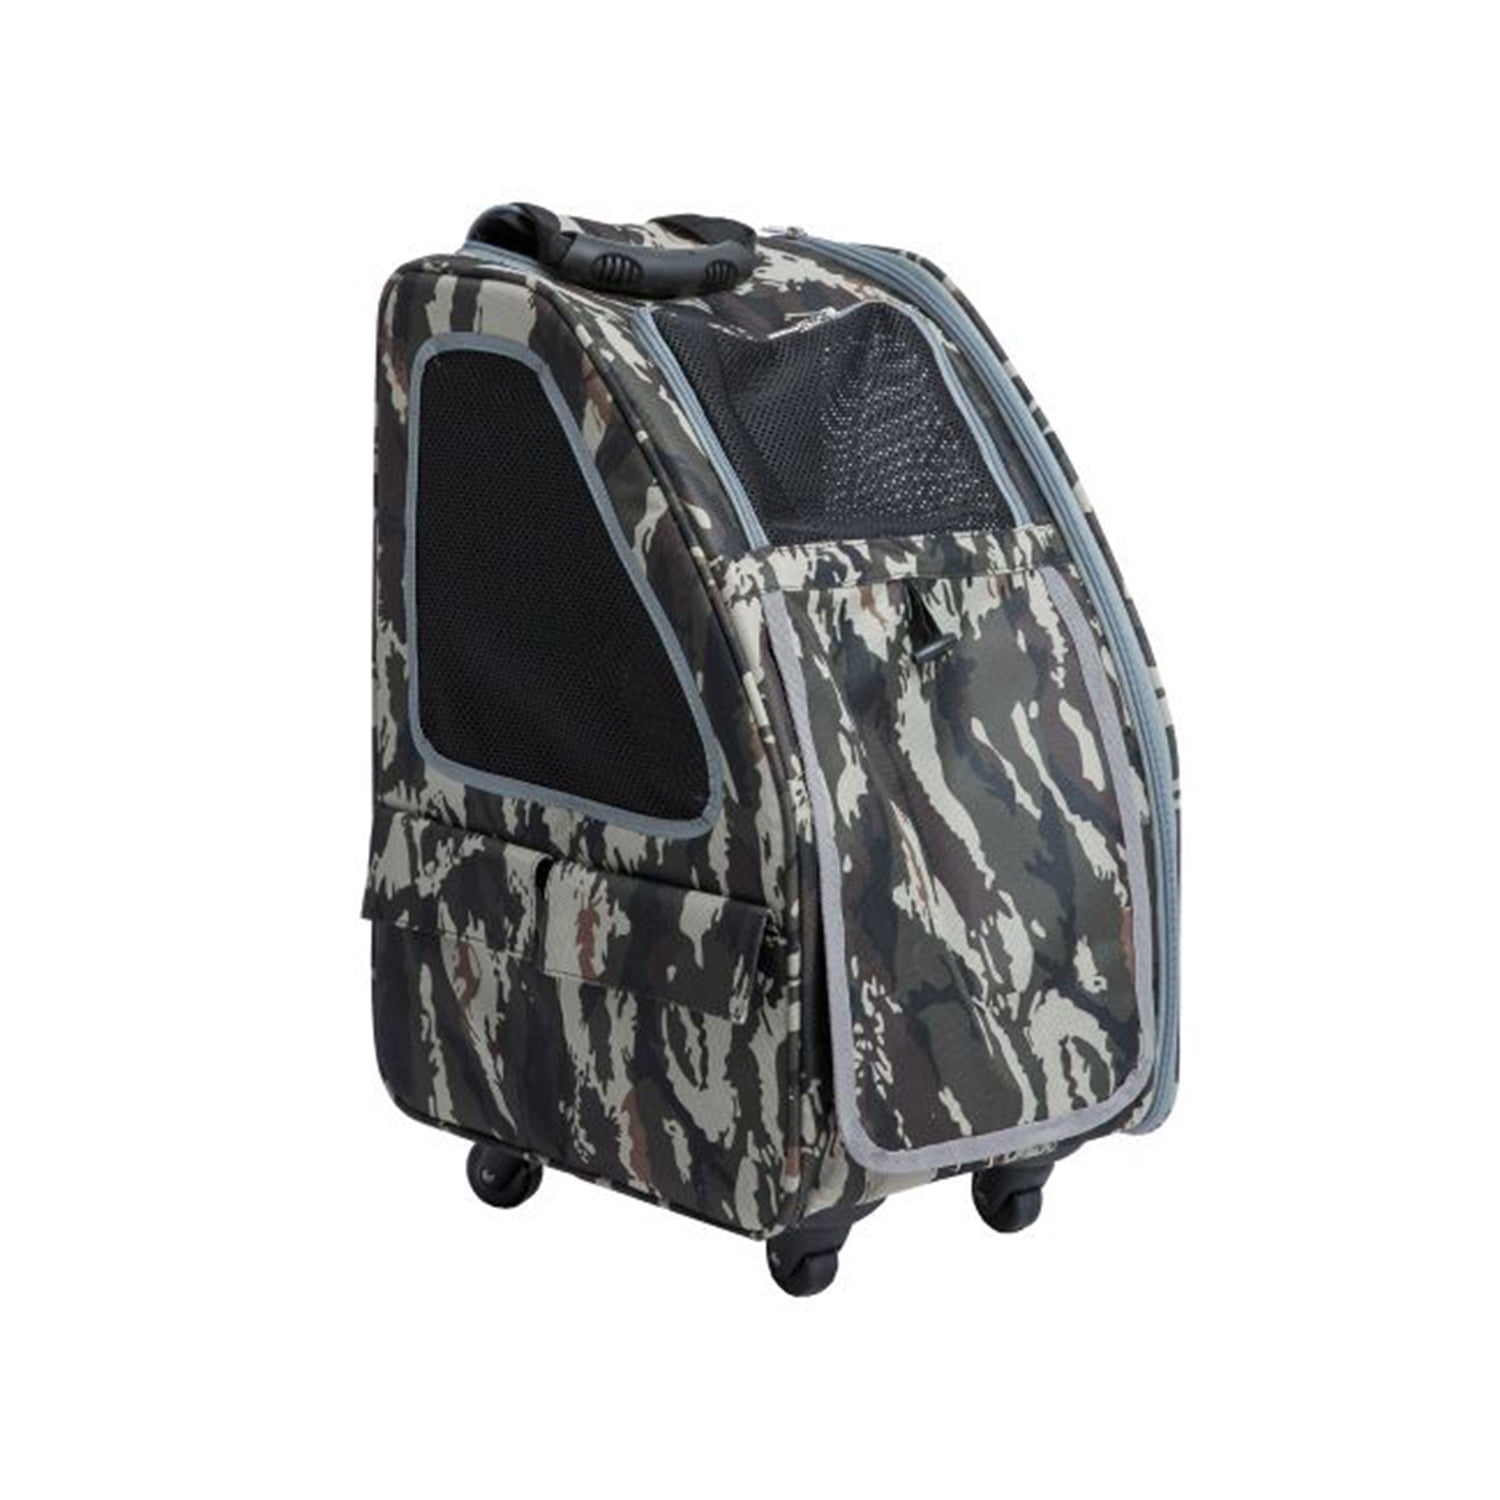 Petique Pet Carrier, Dog Carrier for Small Size Pets, 5-in-1 Ventilated  Carrier Bag for Cats & Dogs, Army Camo